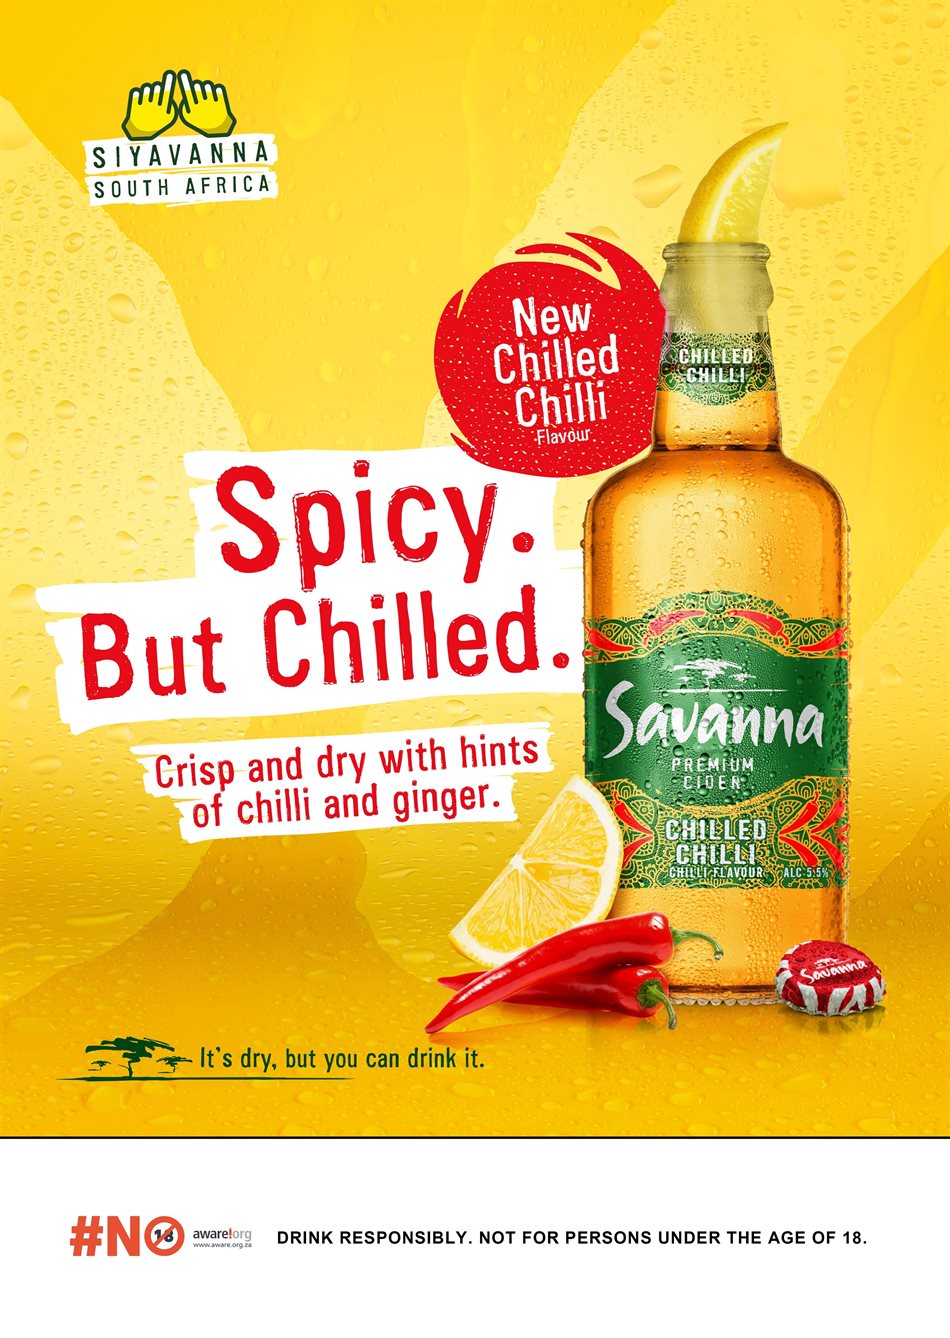 Savanna Premium Cider is bringing the spice with the new 'Chilled Chilli'